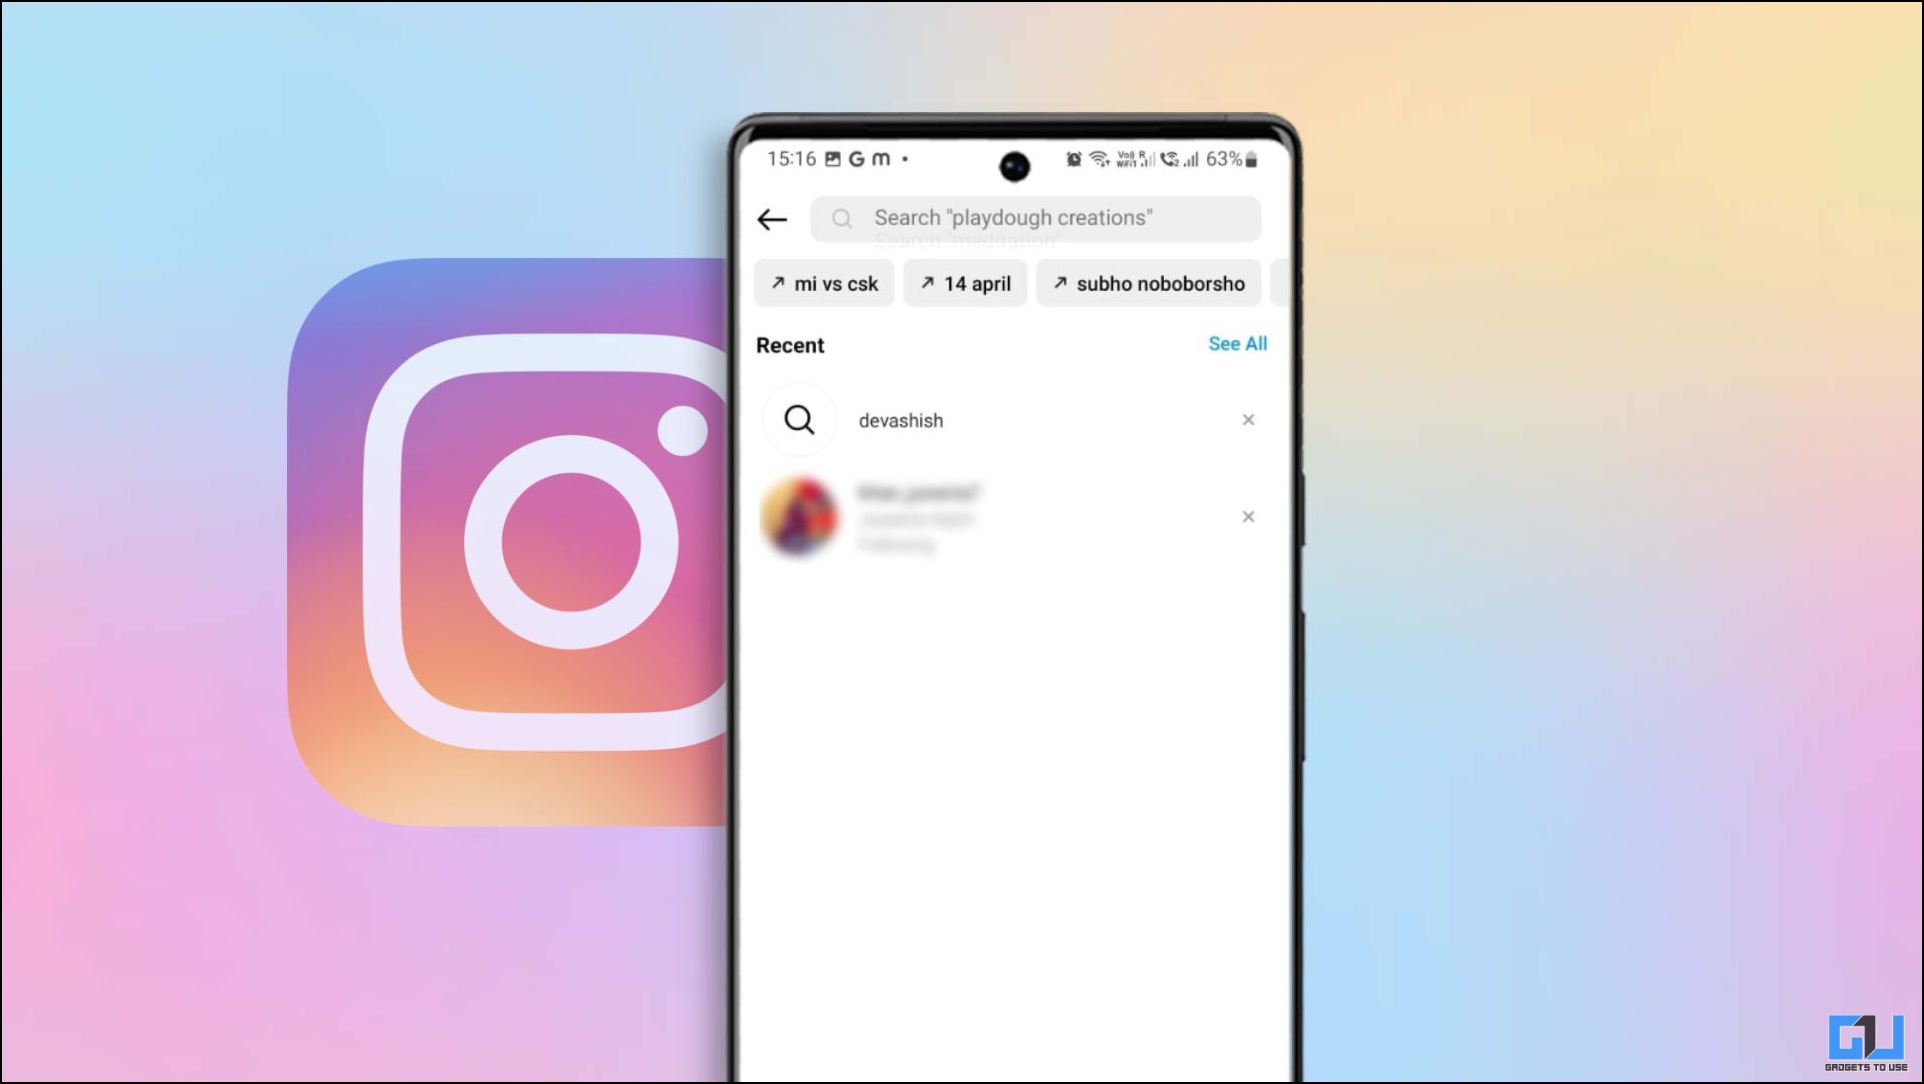 Search contact on Instagram using number